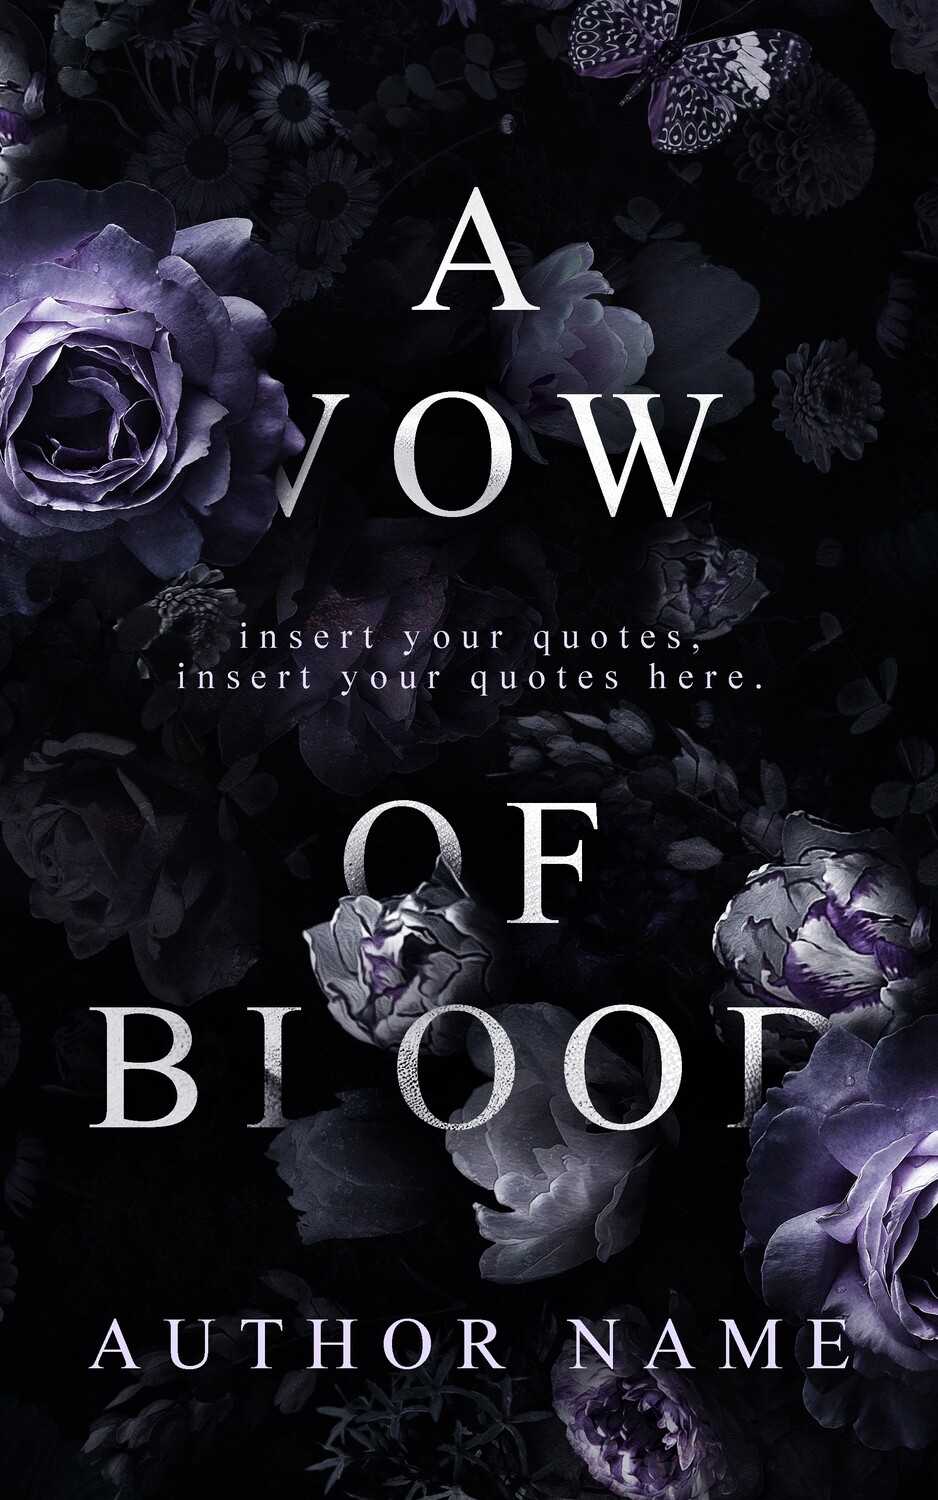 A VOW OF BLOOD